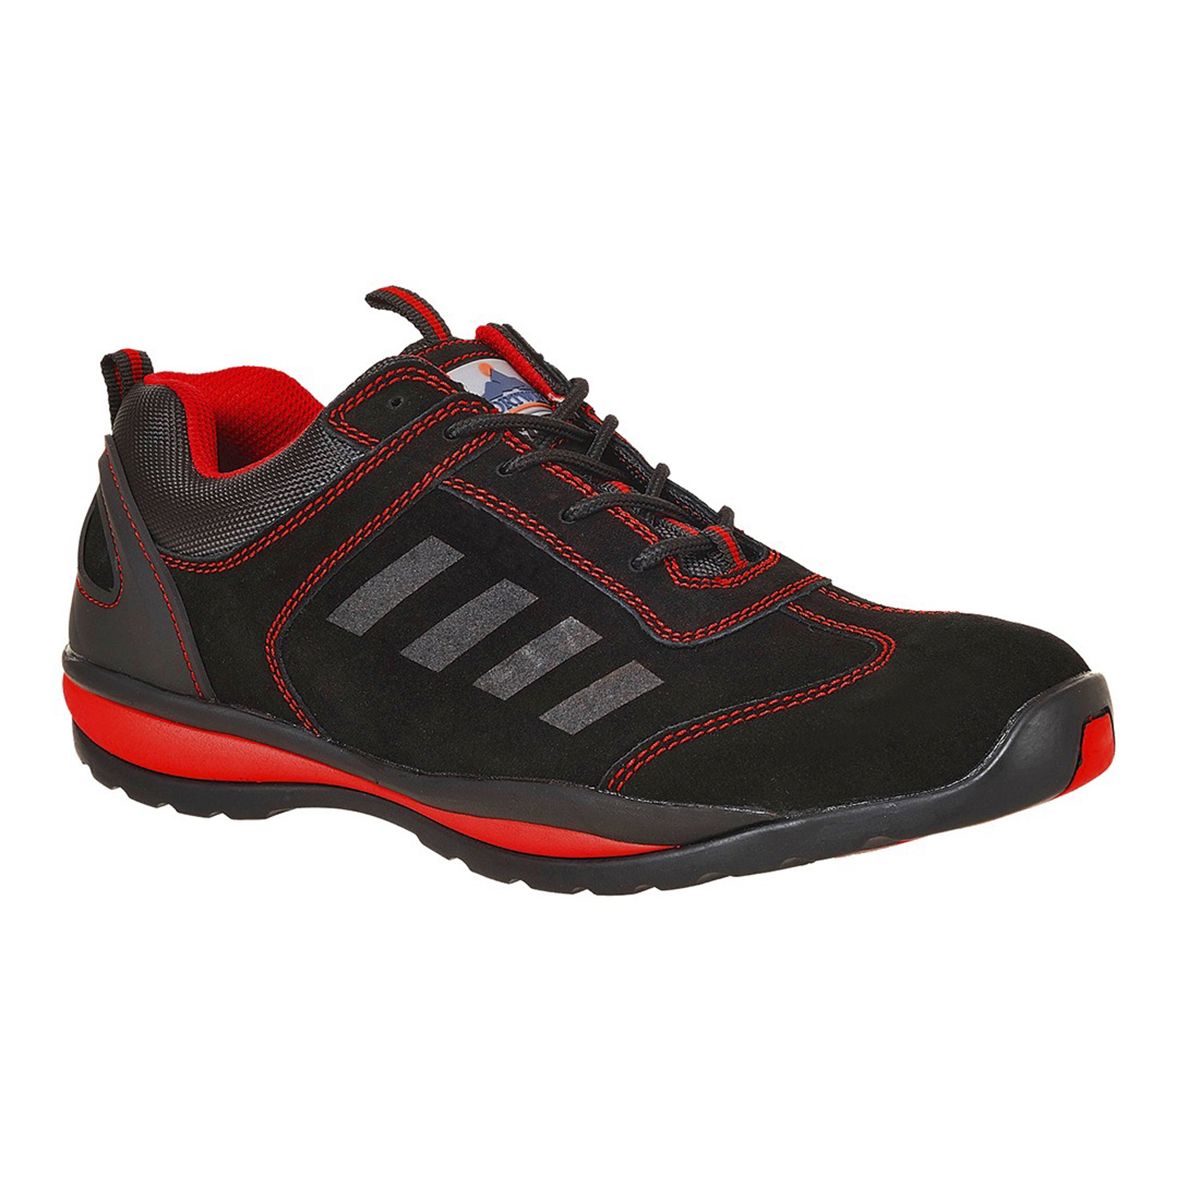 RS PRO Mens Black/Red Toe Capped Safety Trainers, UK 7.5, EU 41 | RS